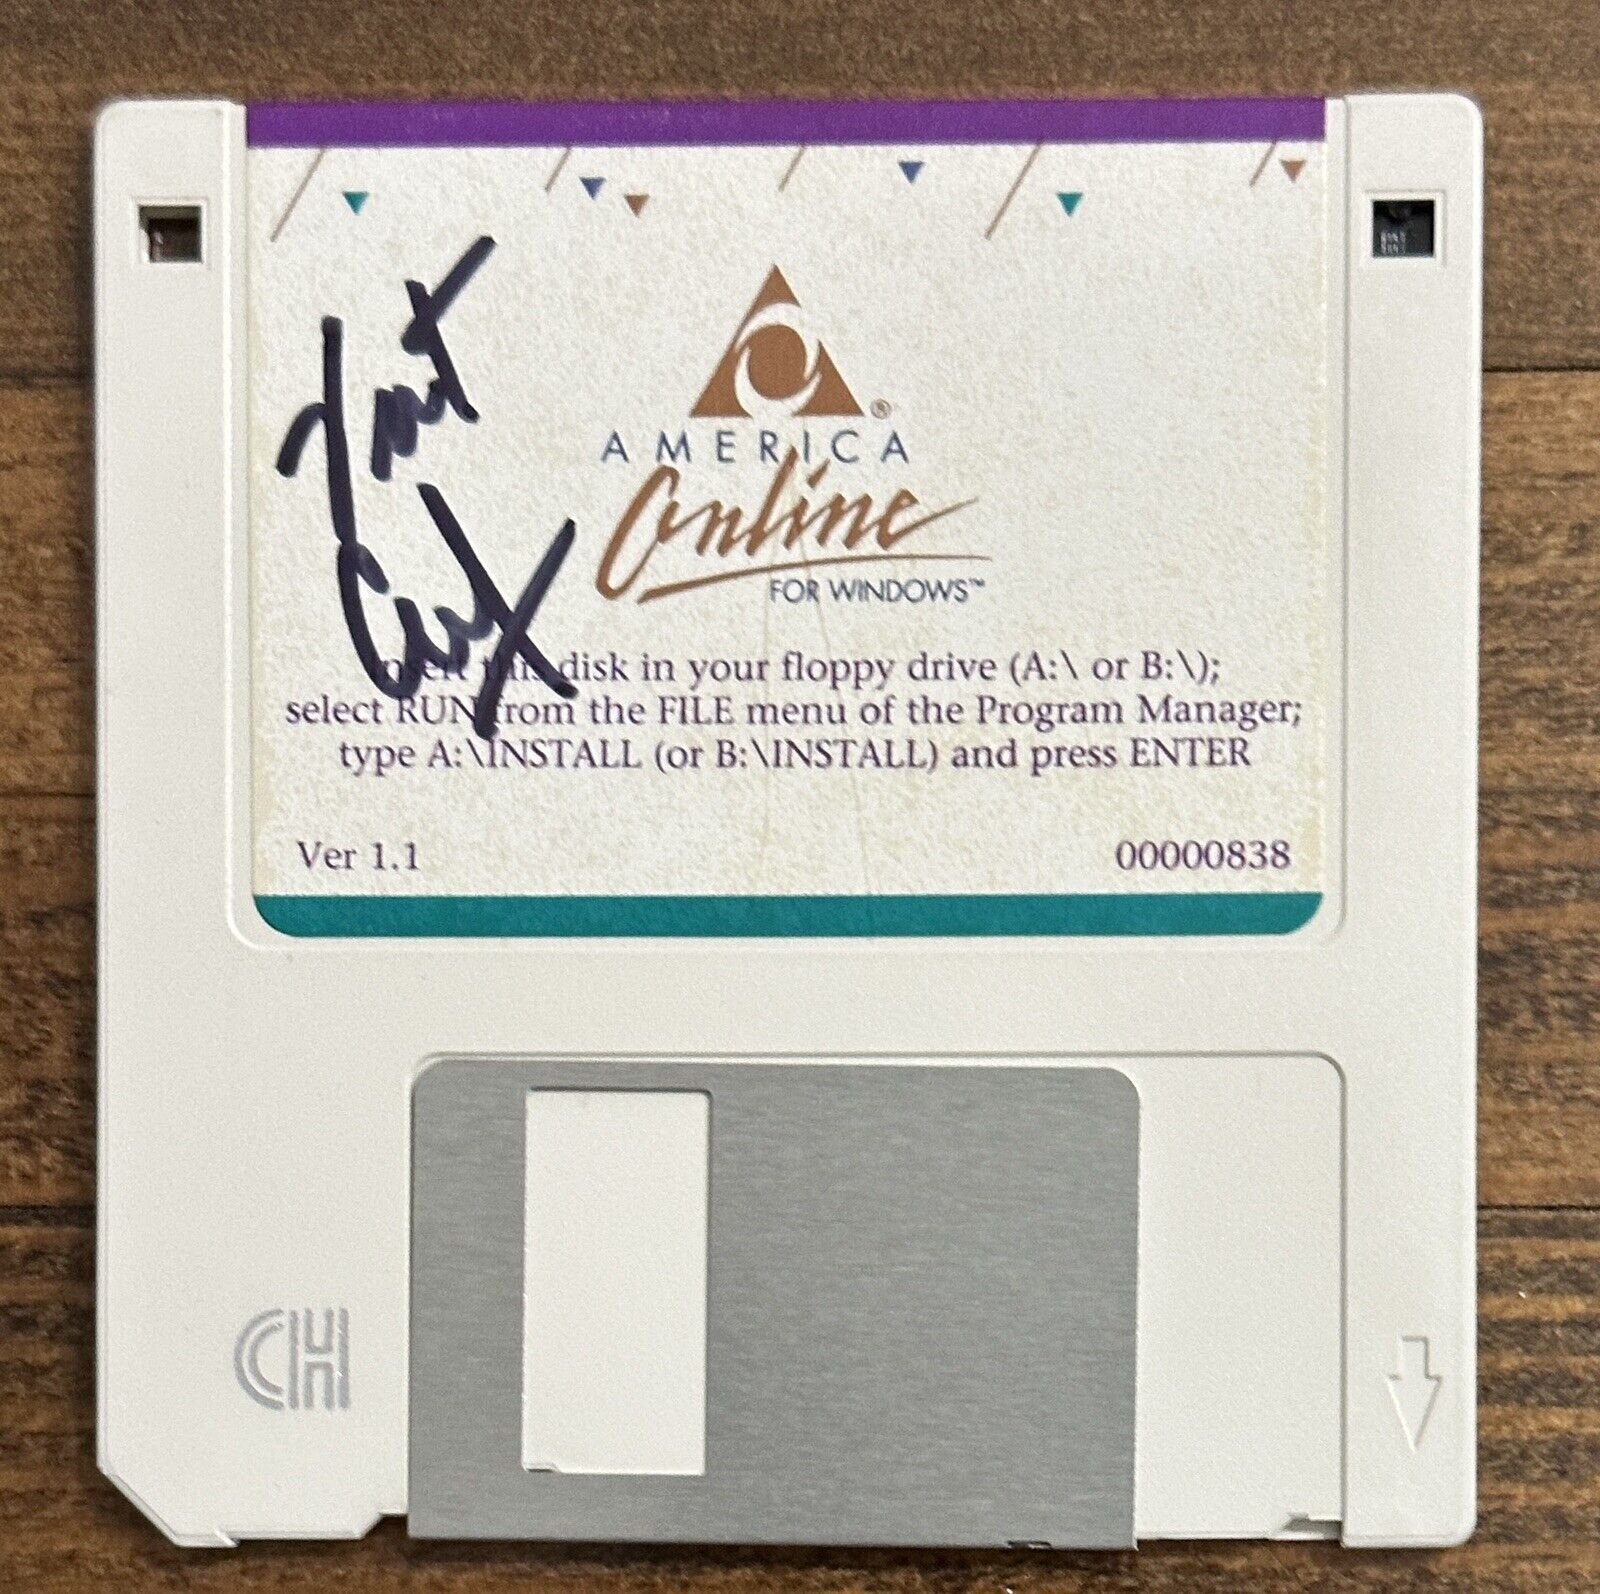 Vint Cerf FATHER OF THE INTERNET SIGNED America Online AOL 1.1 Disk BAS Beckett